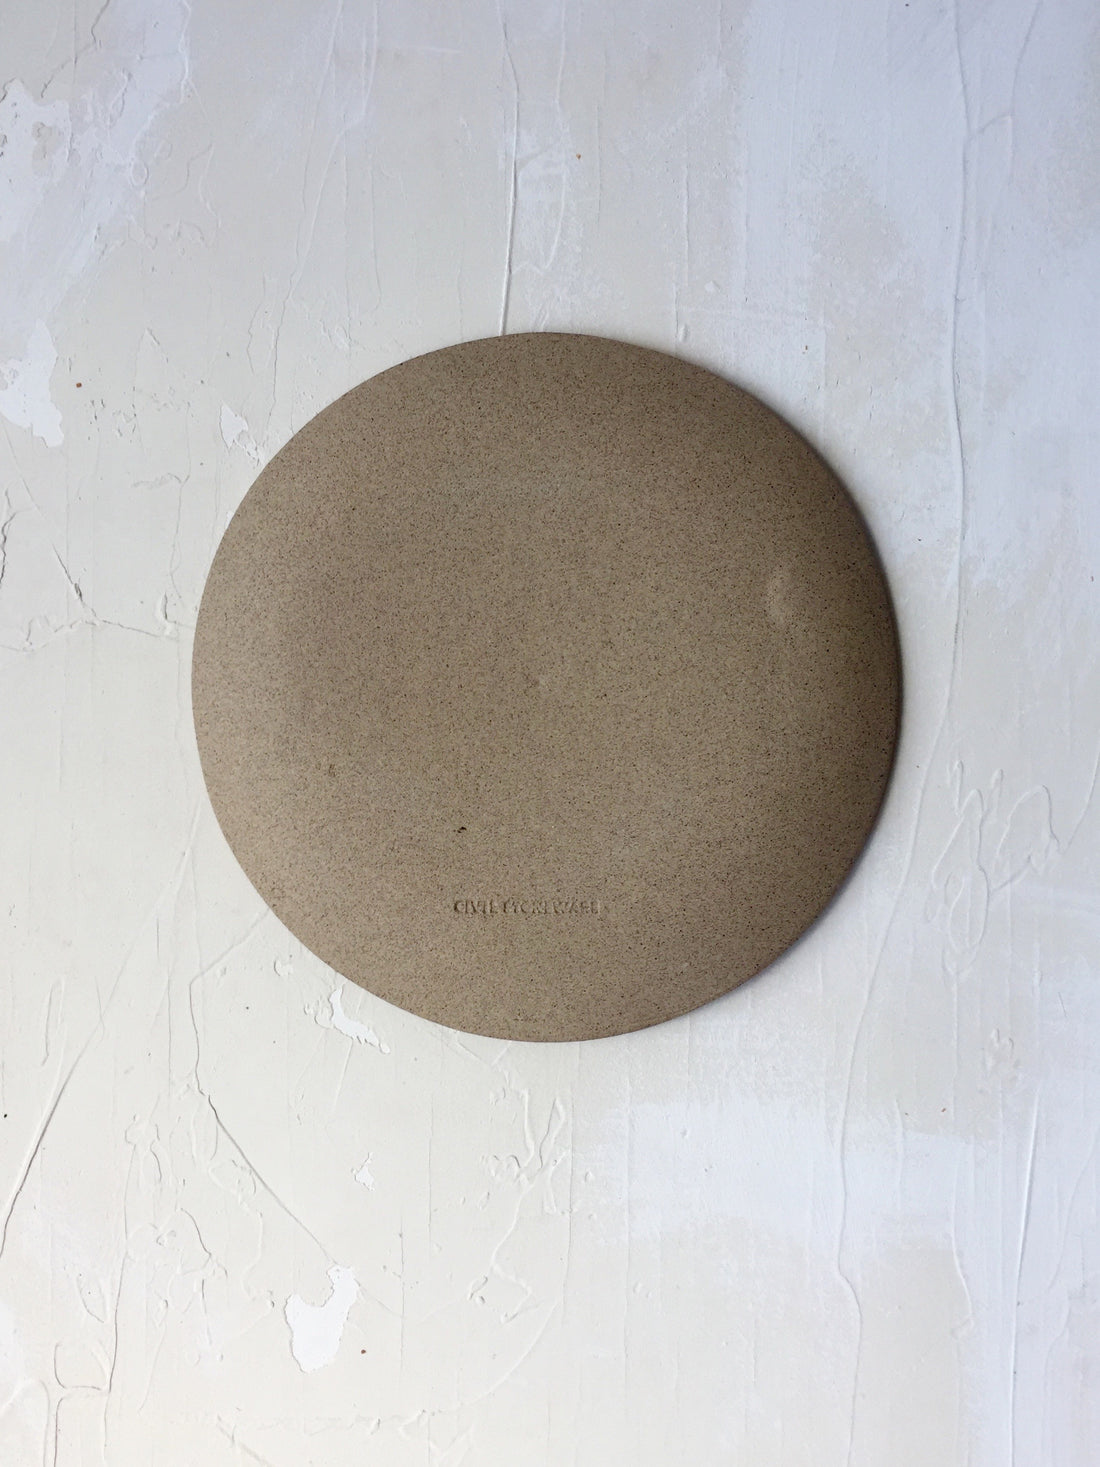 8.5 inch Orb Plate in Sand